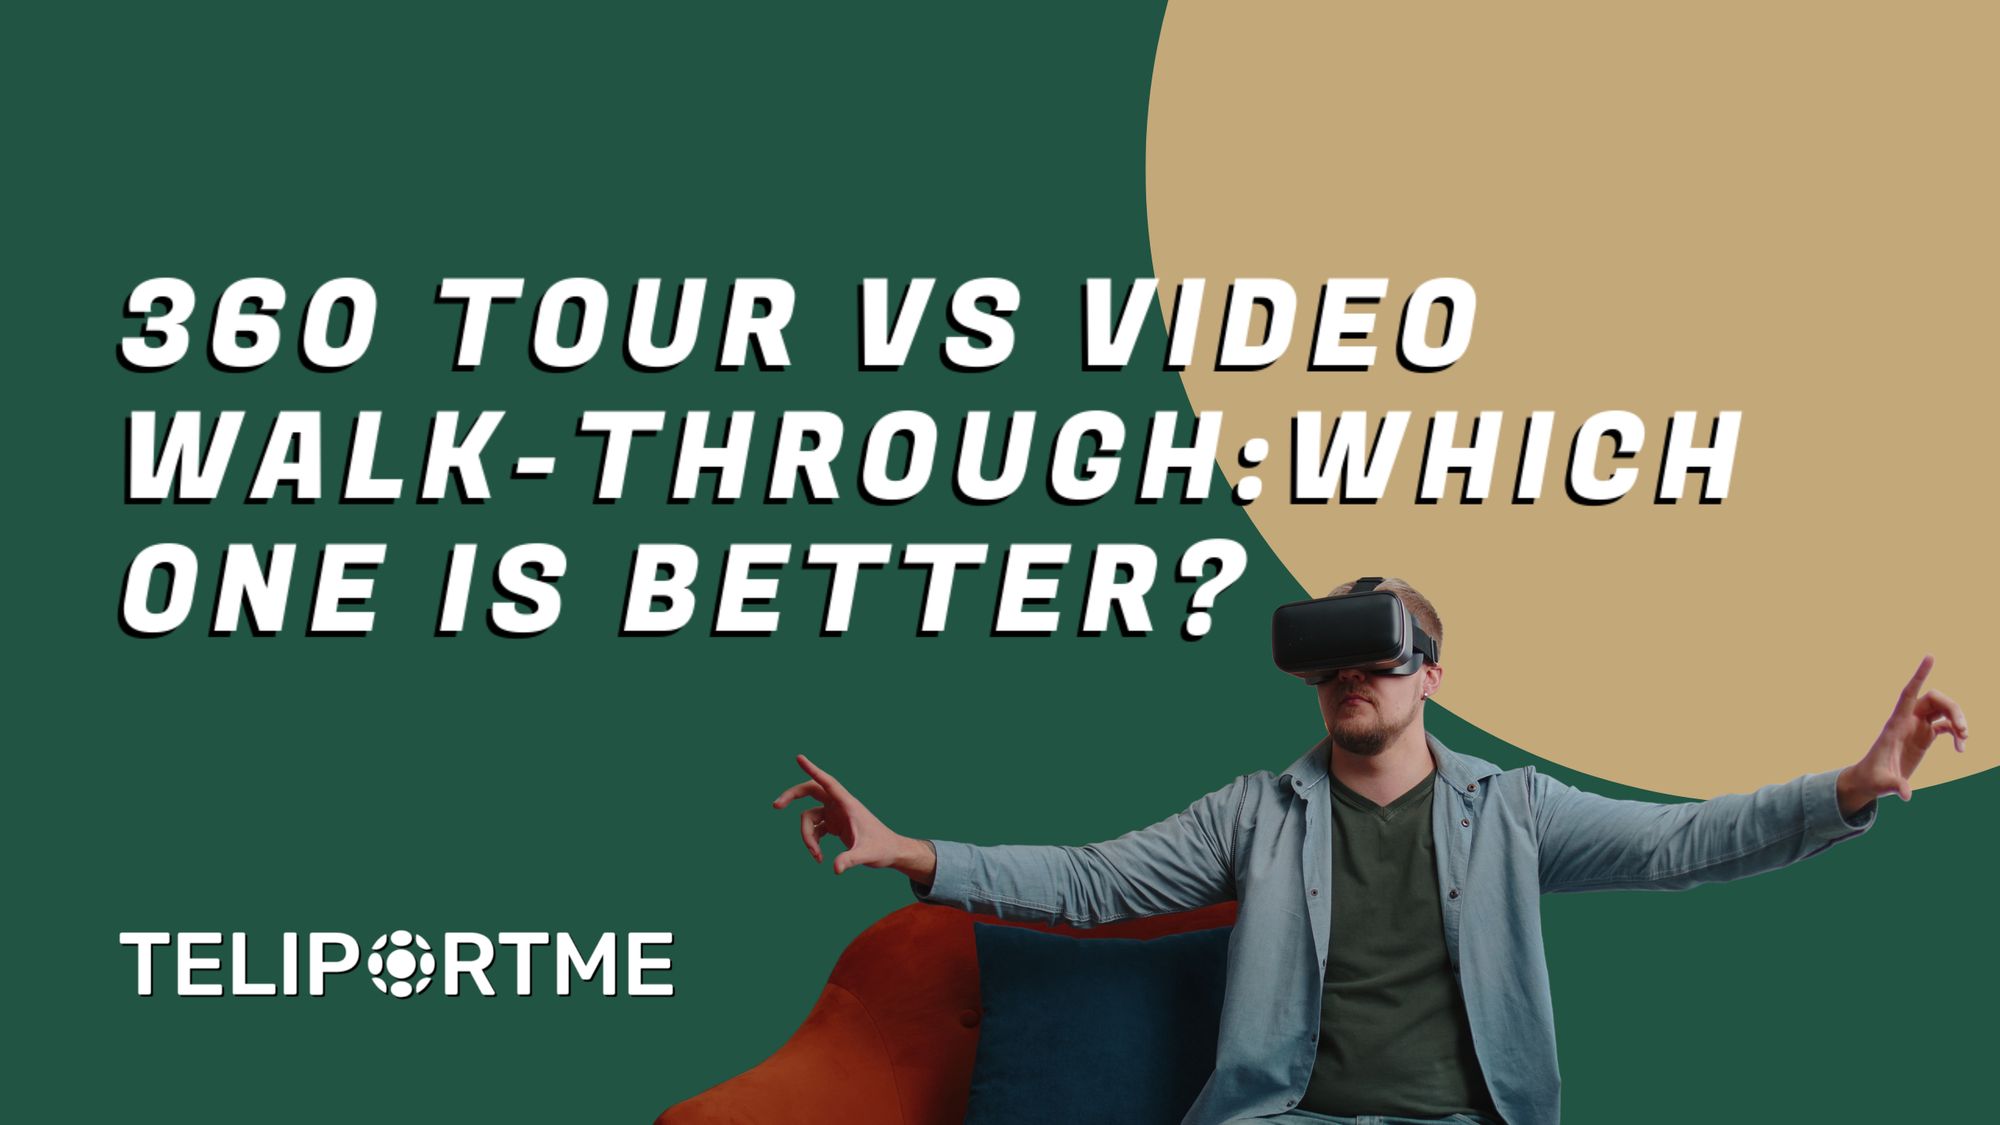 360 Virtual Tour vs Video Walk-Through: Which One is Better?